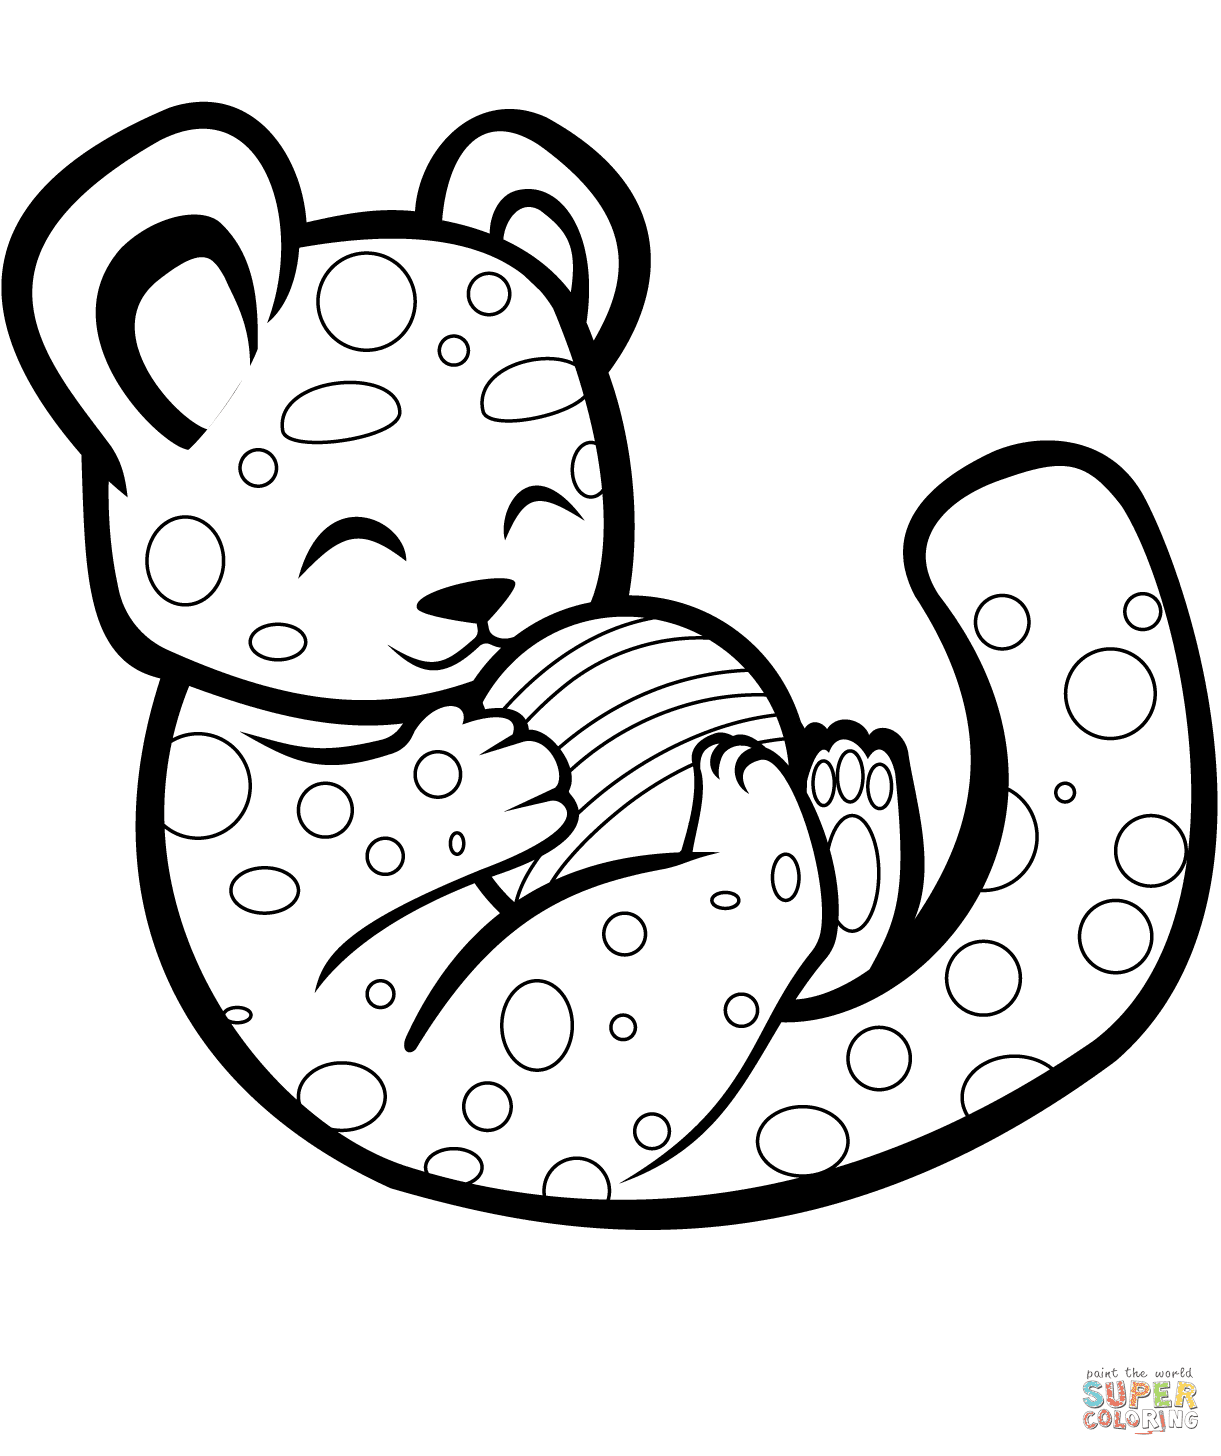 Cute Cheetah Playing with a Ball Coloring Page